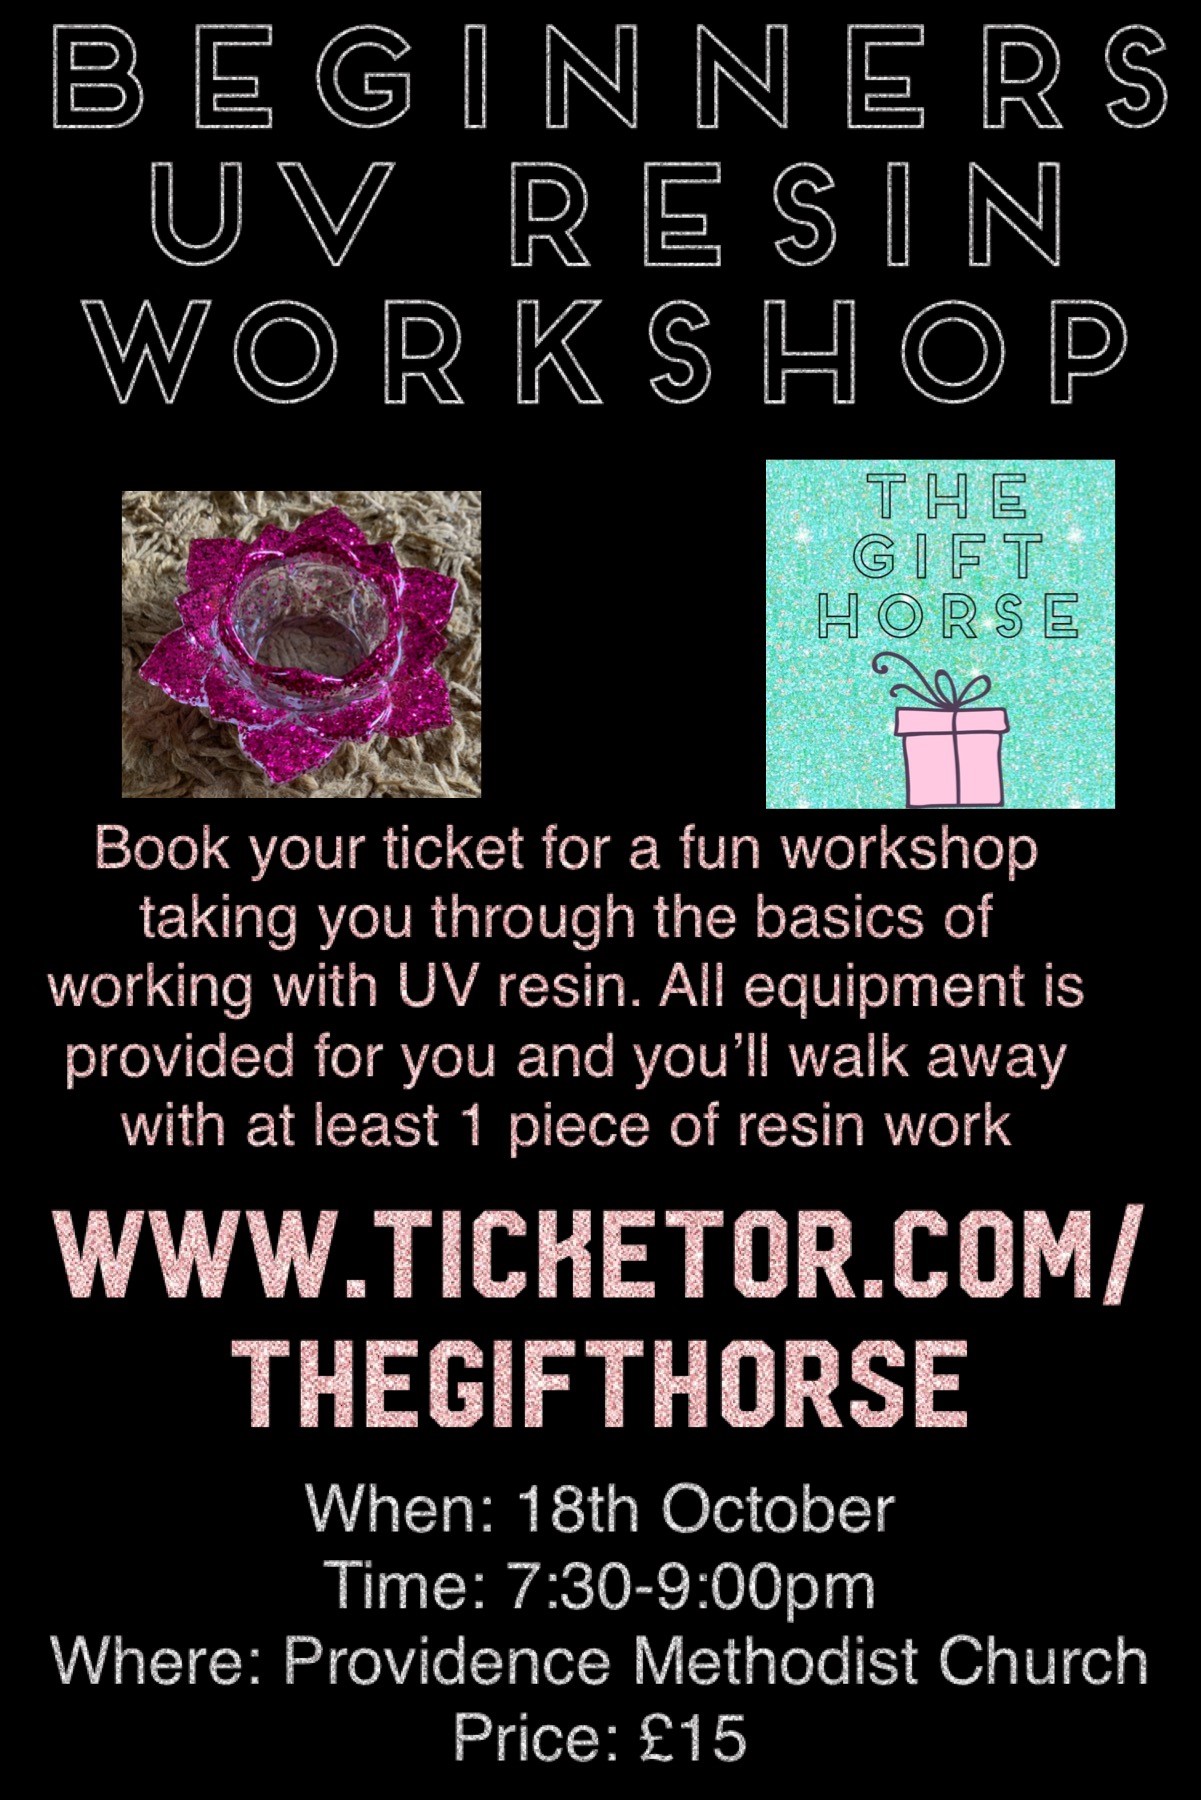 Beginners Resin Workshop  on oct. 17, 19:30@Providence Methodist Church - Buy tickets and Get information on The Gift Horse 